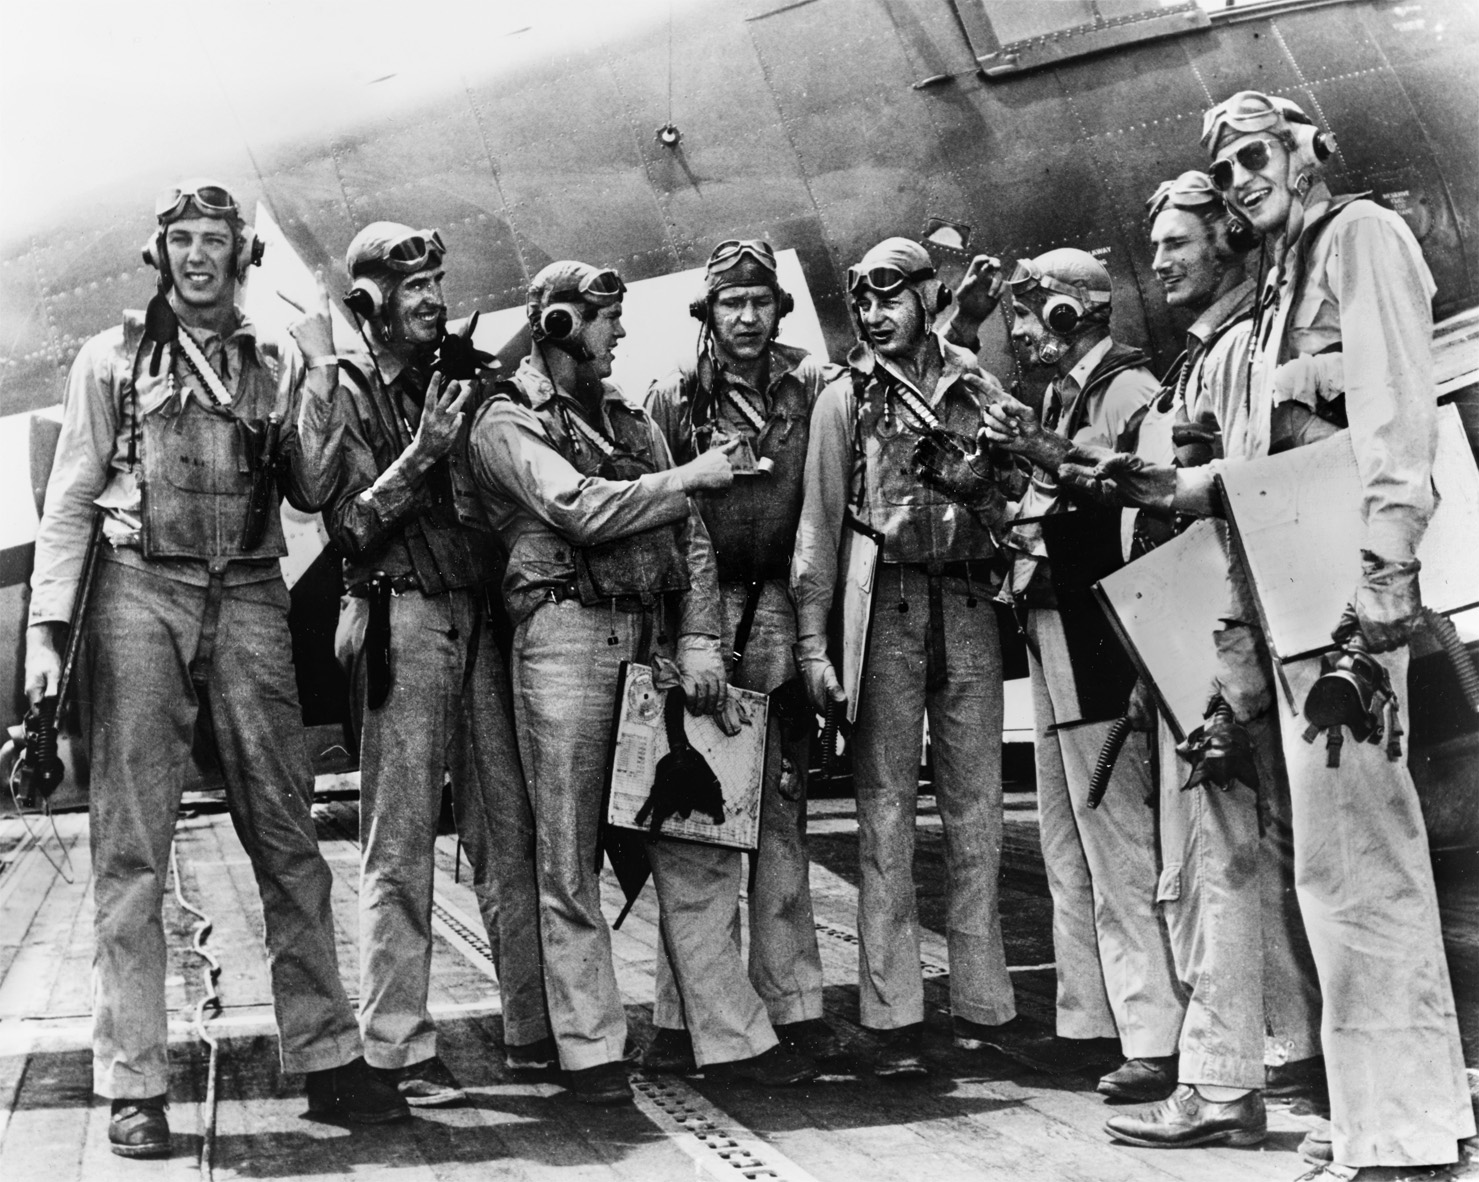 USS Langley’s VF-32 fighter pilots hold up their fingers to indicate victories after their aerial combat over Truk. Hollis Hills stands third from left, Lieutenant Commander Eddie Outlaw stands third from right, while his wingman, Lieutenant (j.g.) Donald ‘Dagwood’ Reeves is fourth from right.